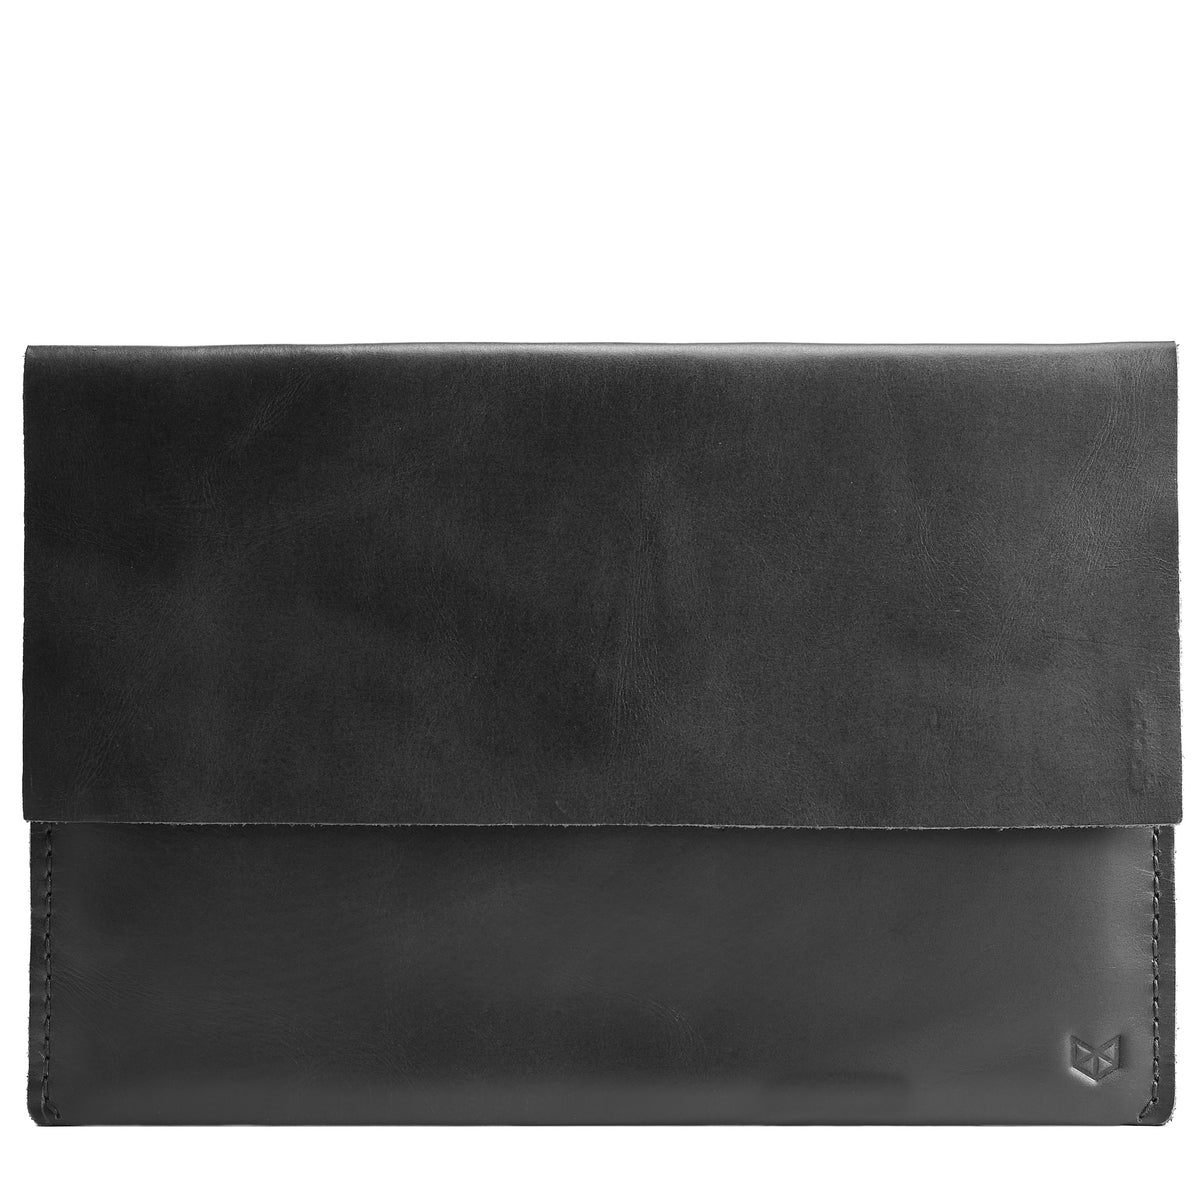 Cover. Black Leather Minial iPad Sleeve Case by Capra Leather